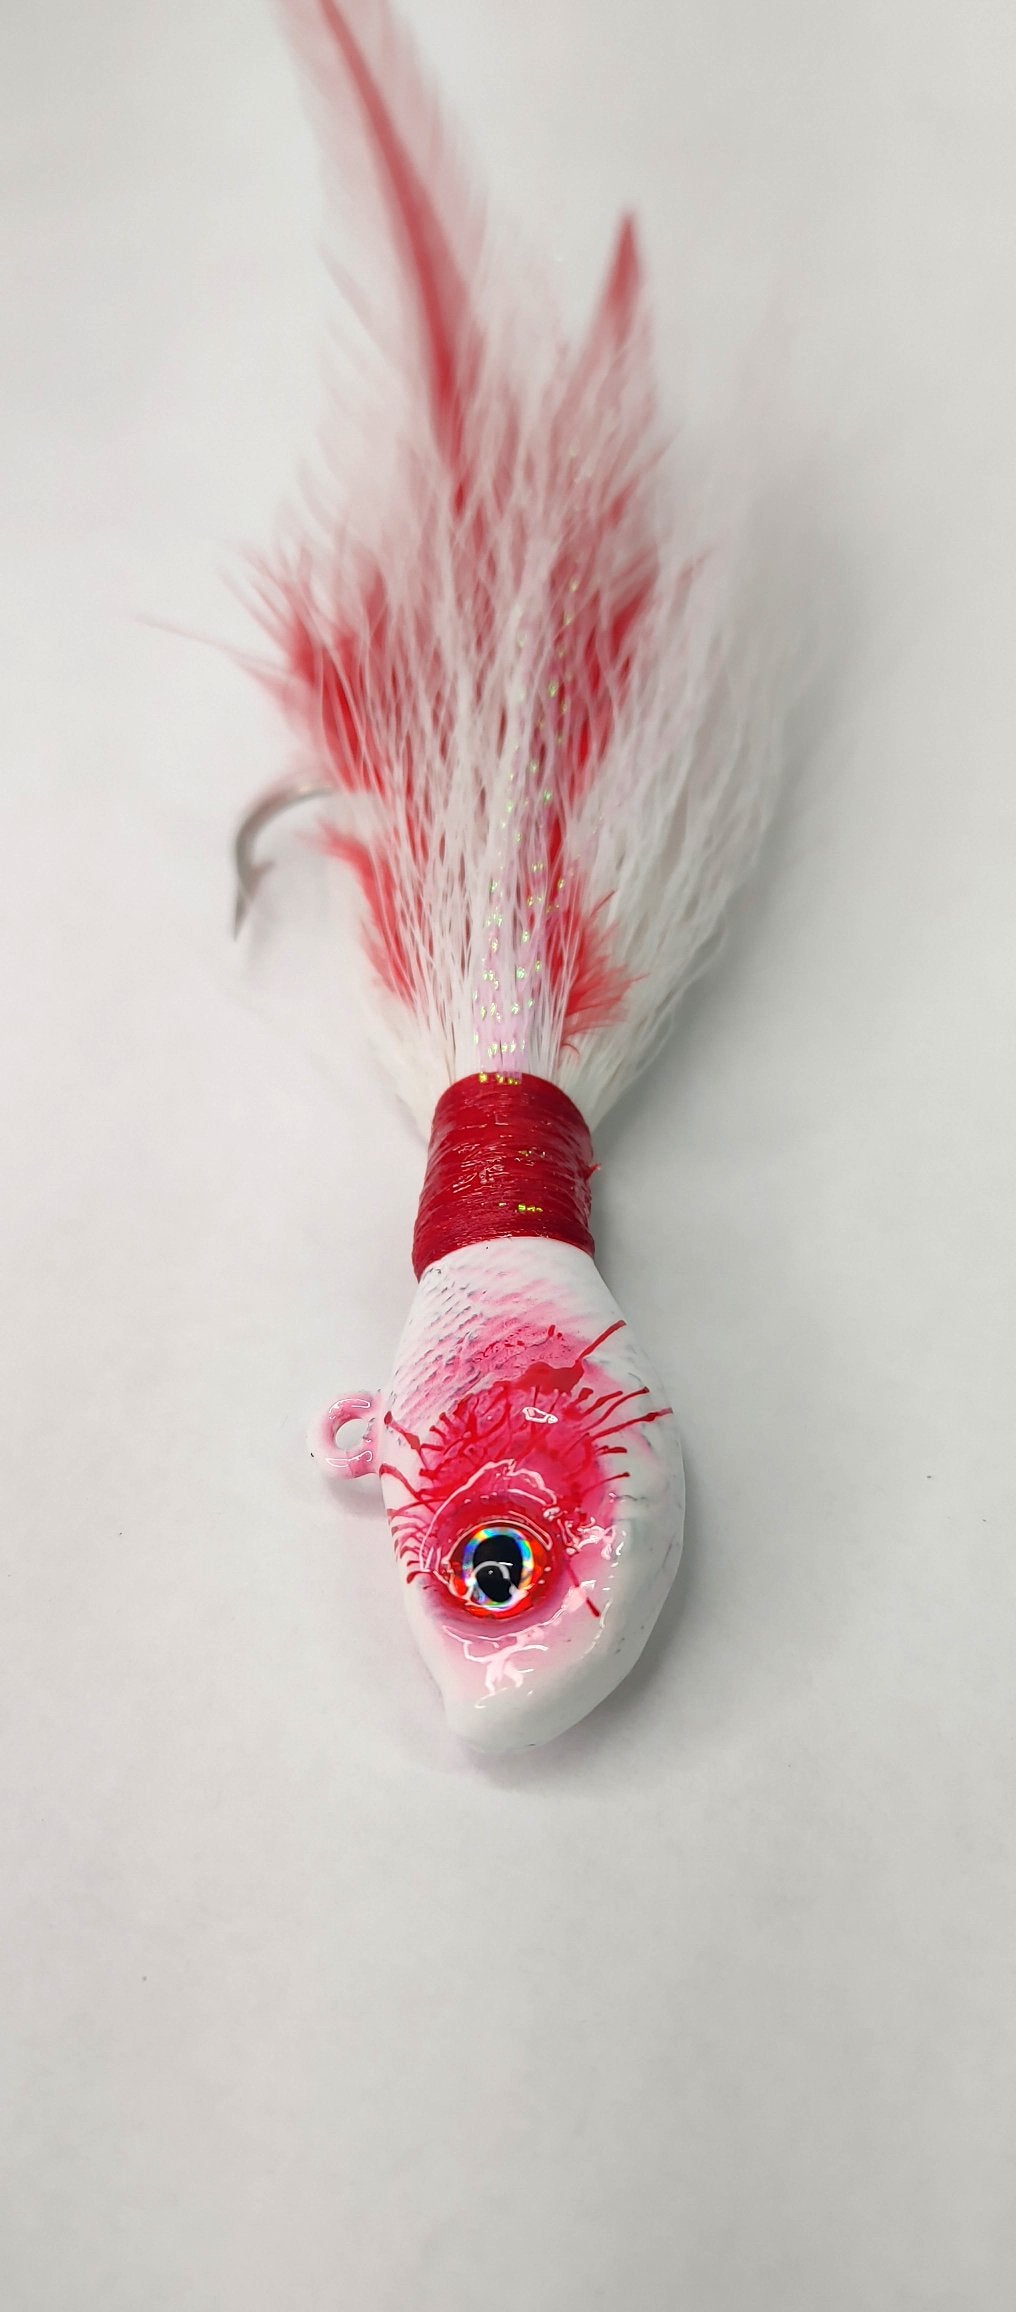 Pennywise BuckTail Jig (1.5oz) HAND MADE